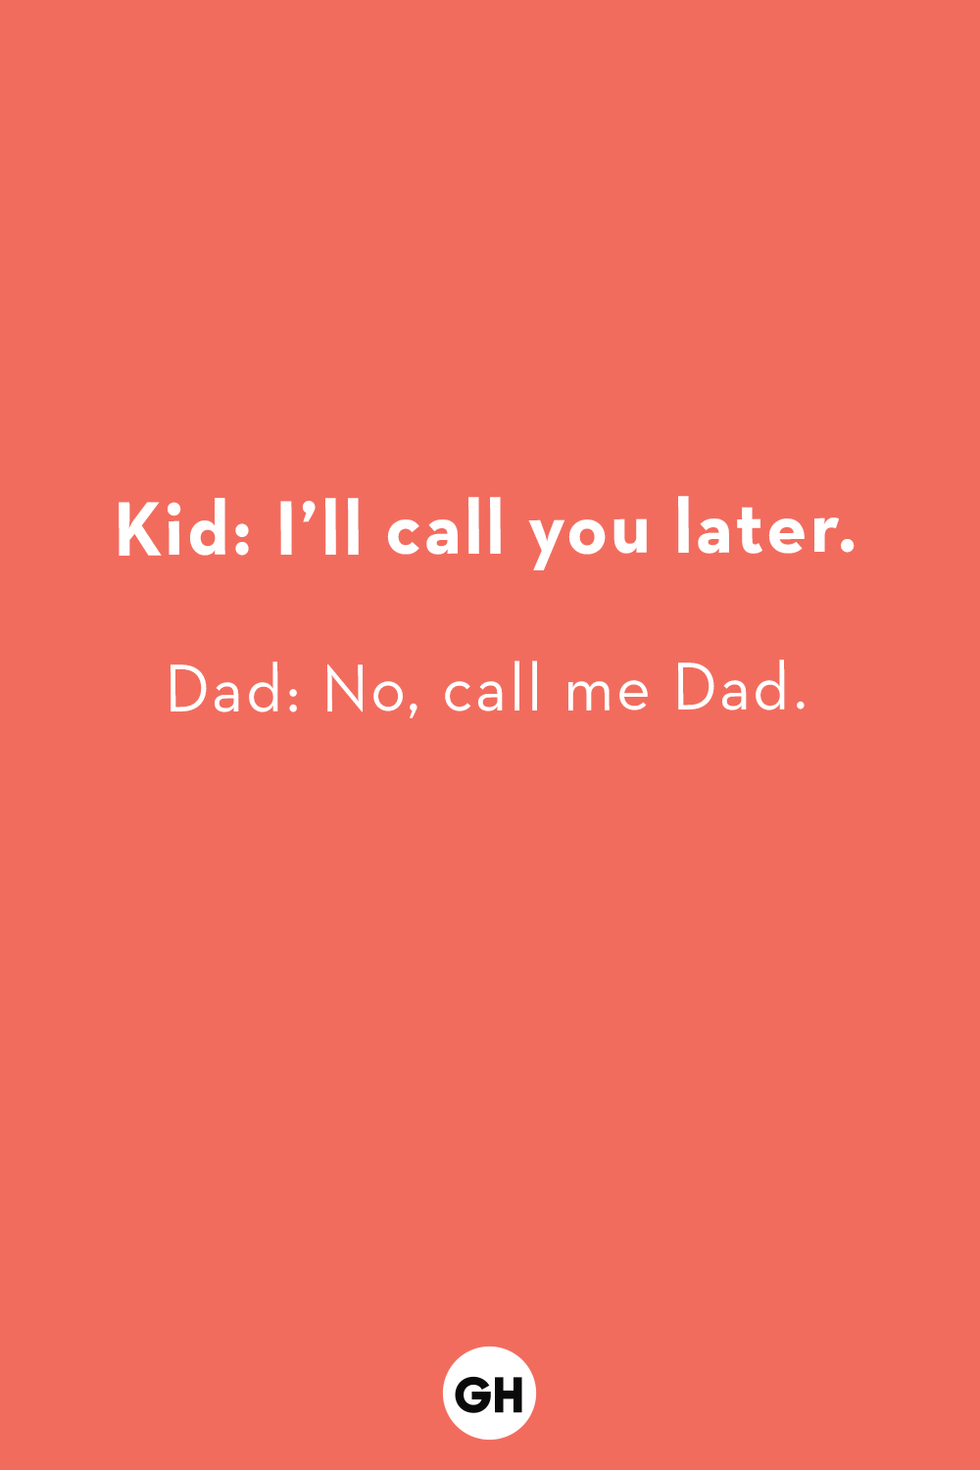 145 Best Dad Jokes of All Time - Corny, Funny Dad Jokes 2023